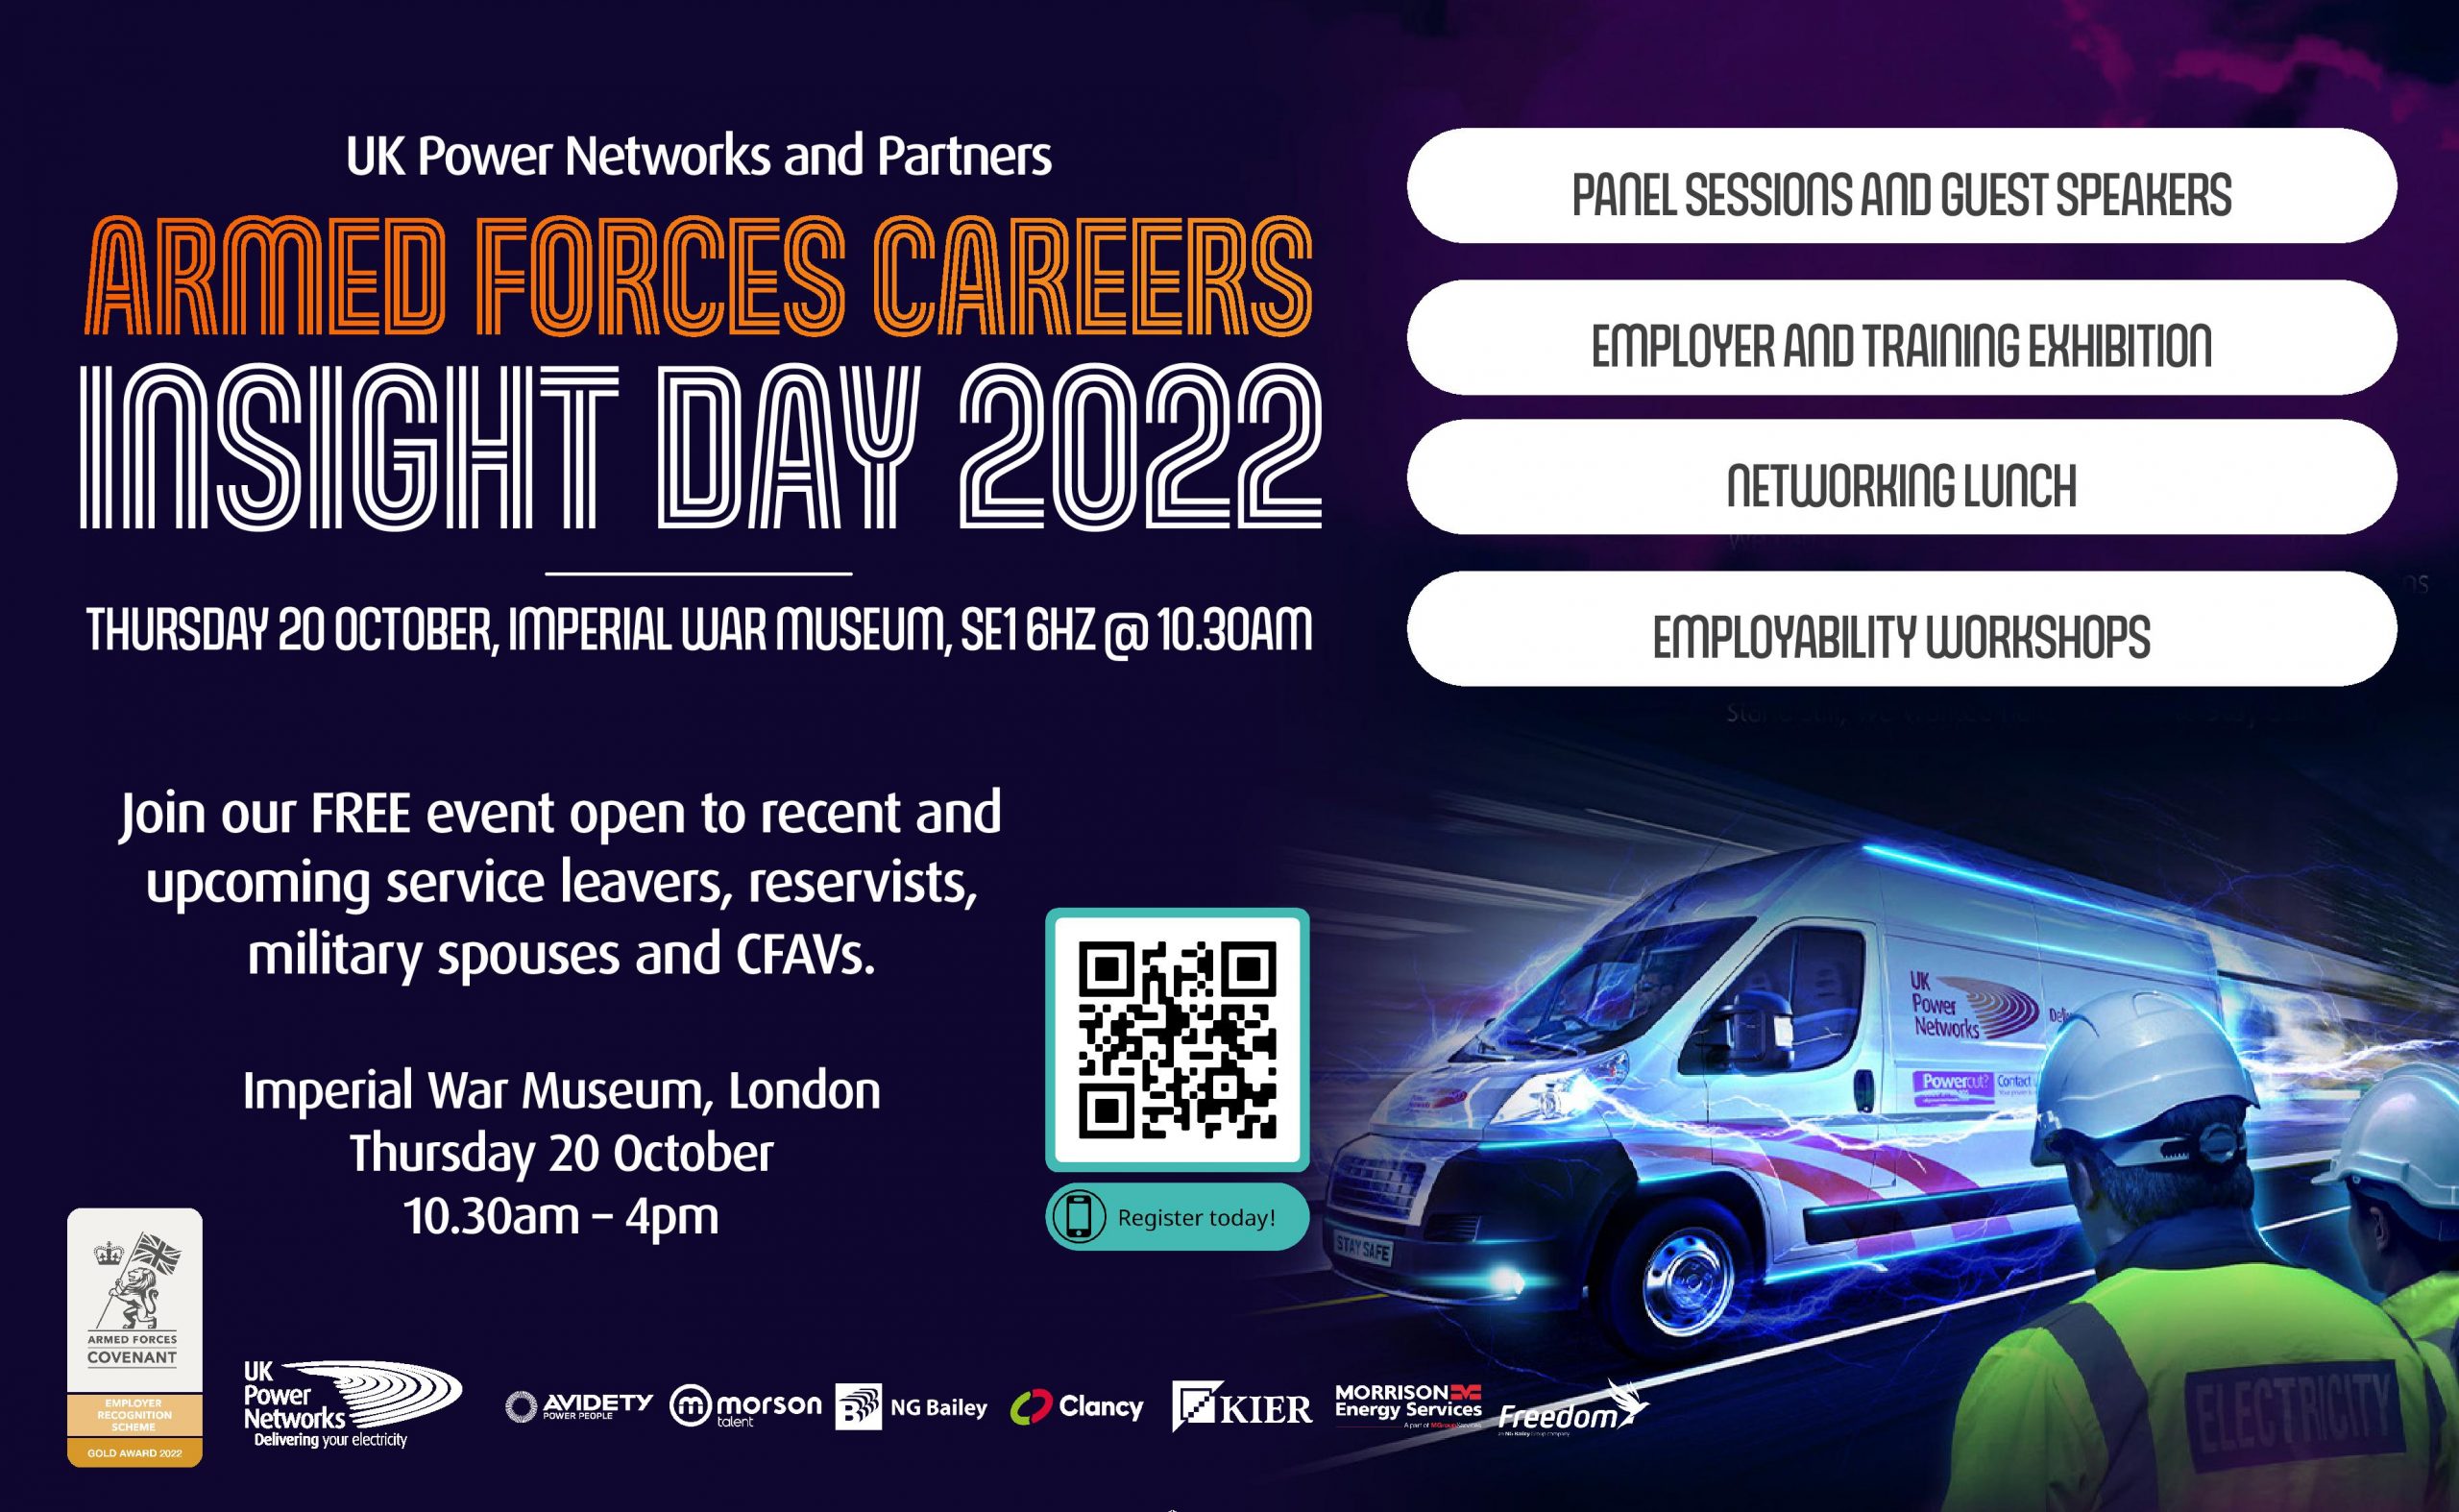 UK Power Networks & Partners Insight Day 2022